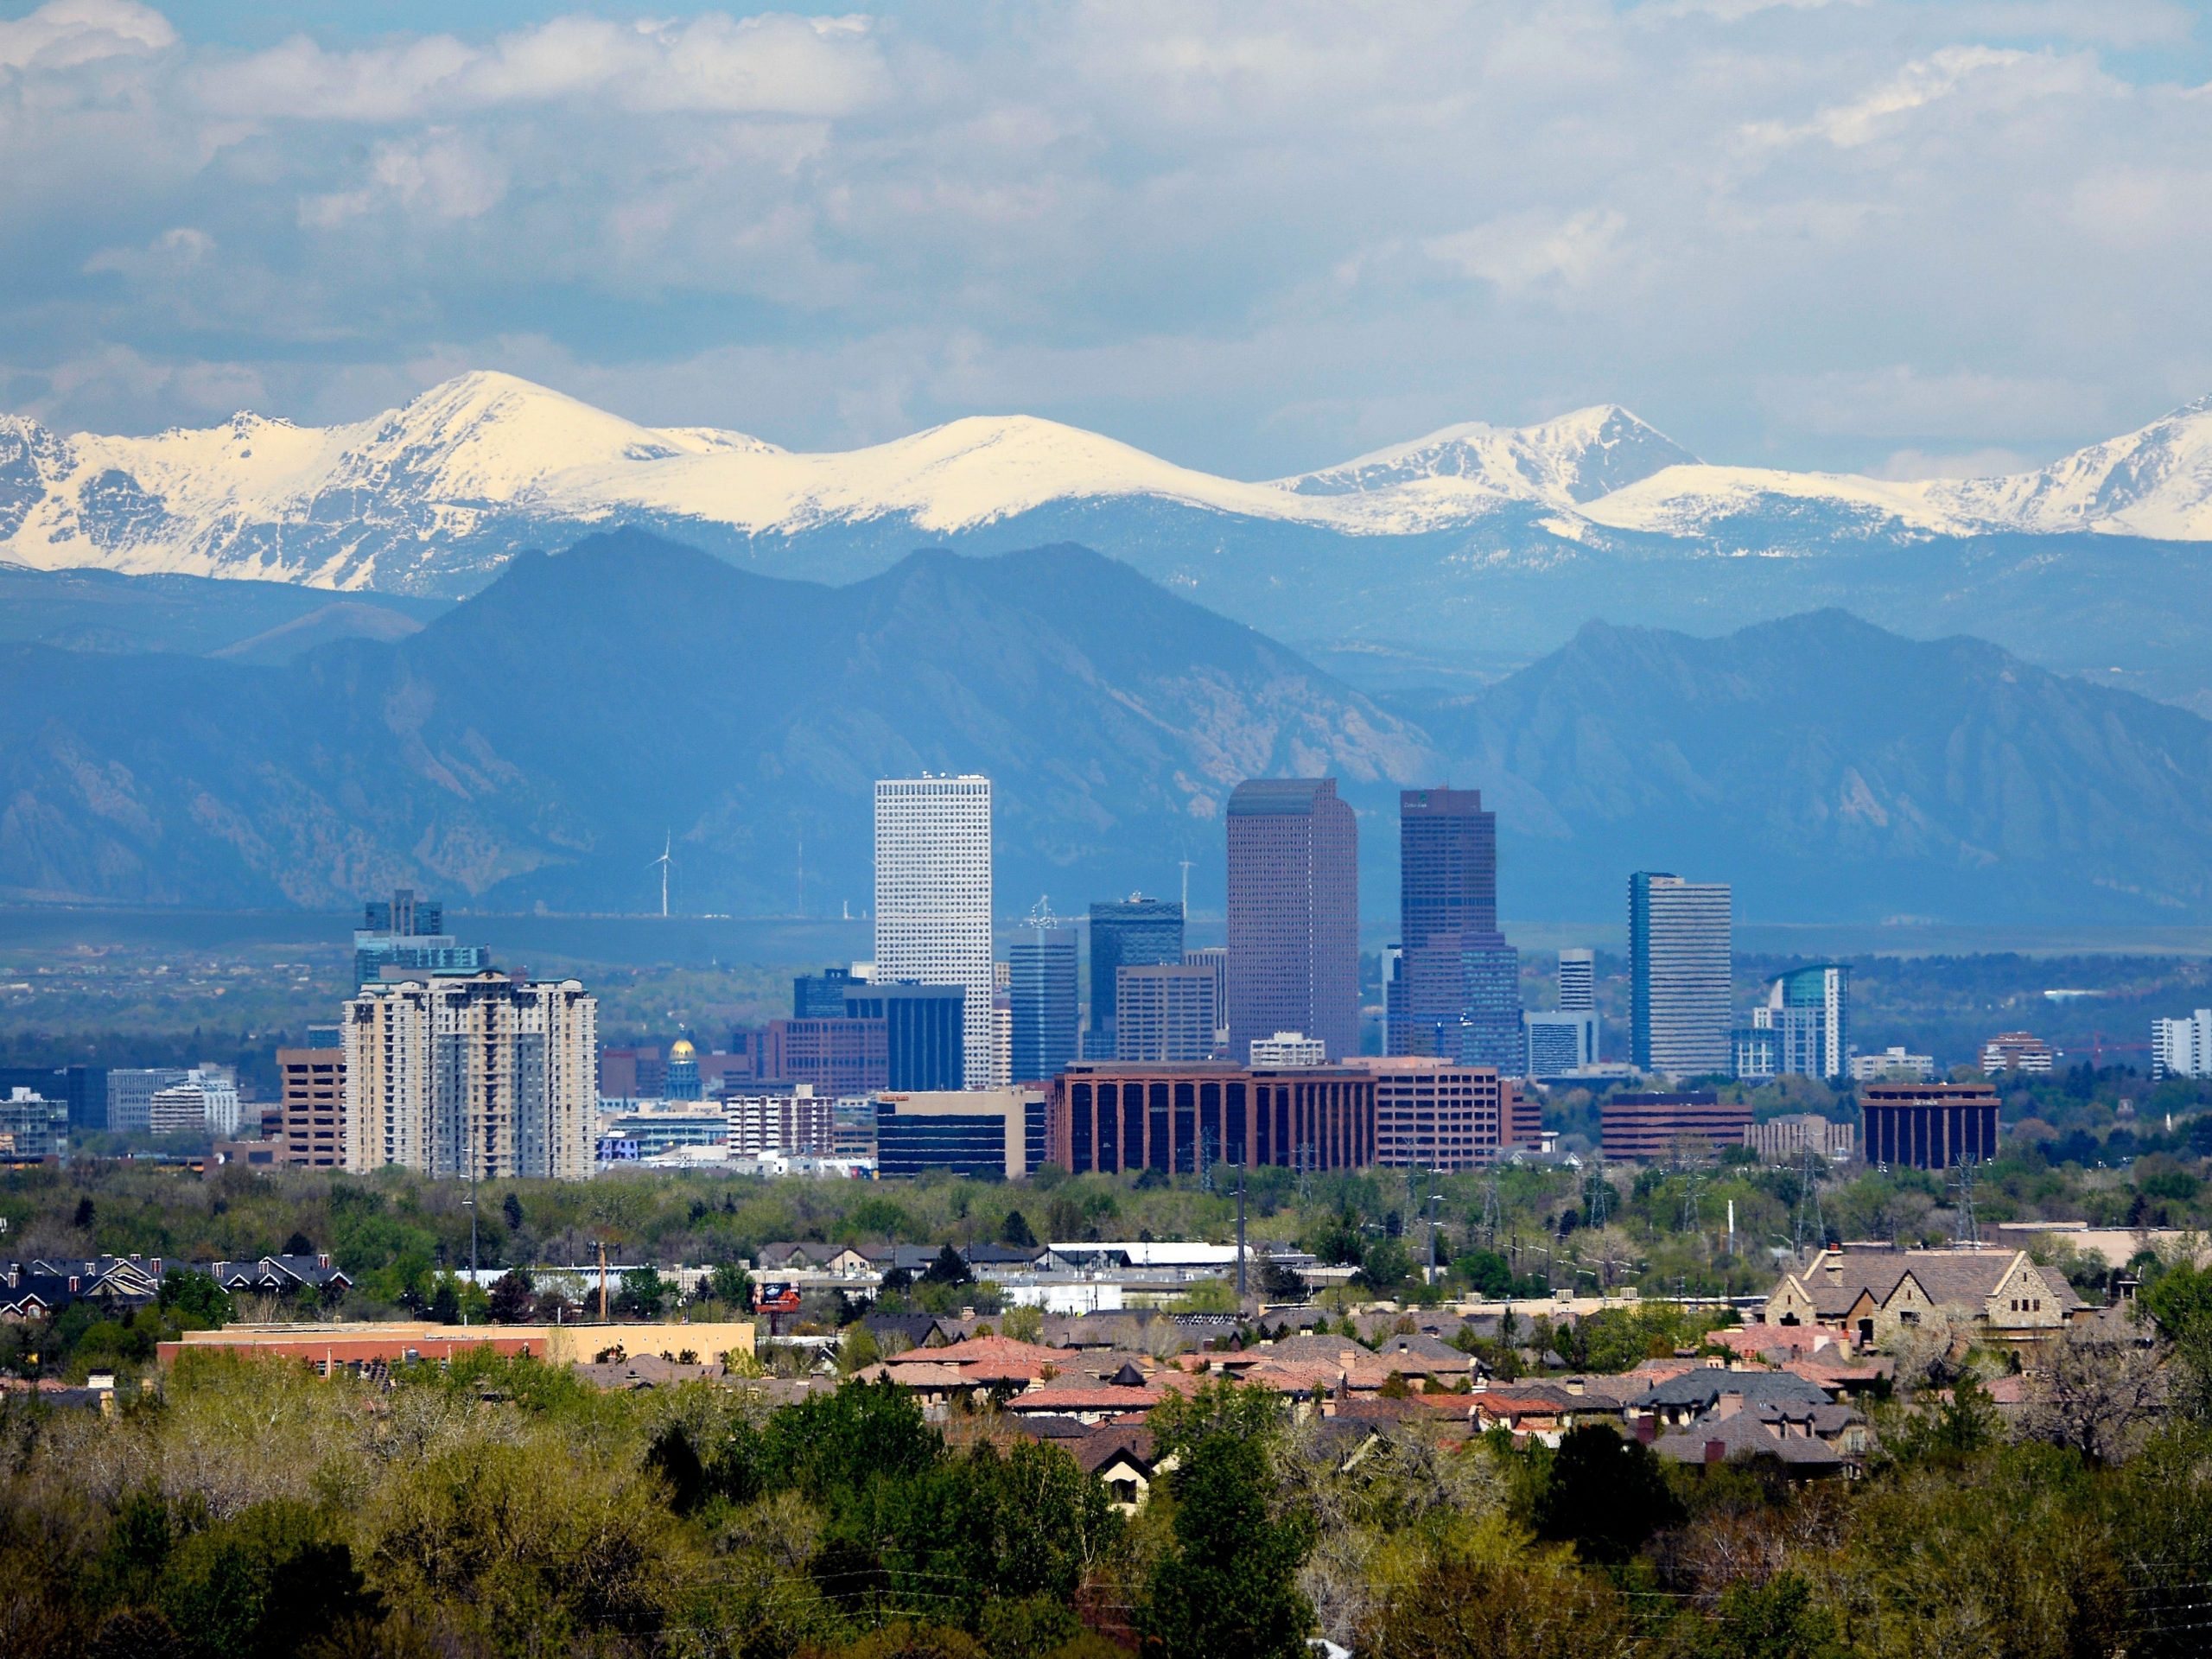 Denver Skyline as seen from the Cherry Creek Dam road in Denver, Colorado on April 30, 2015.